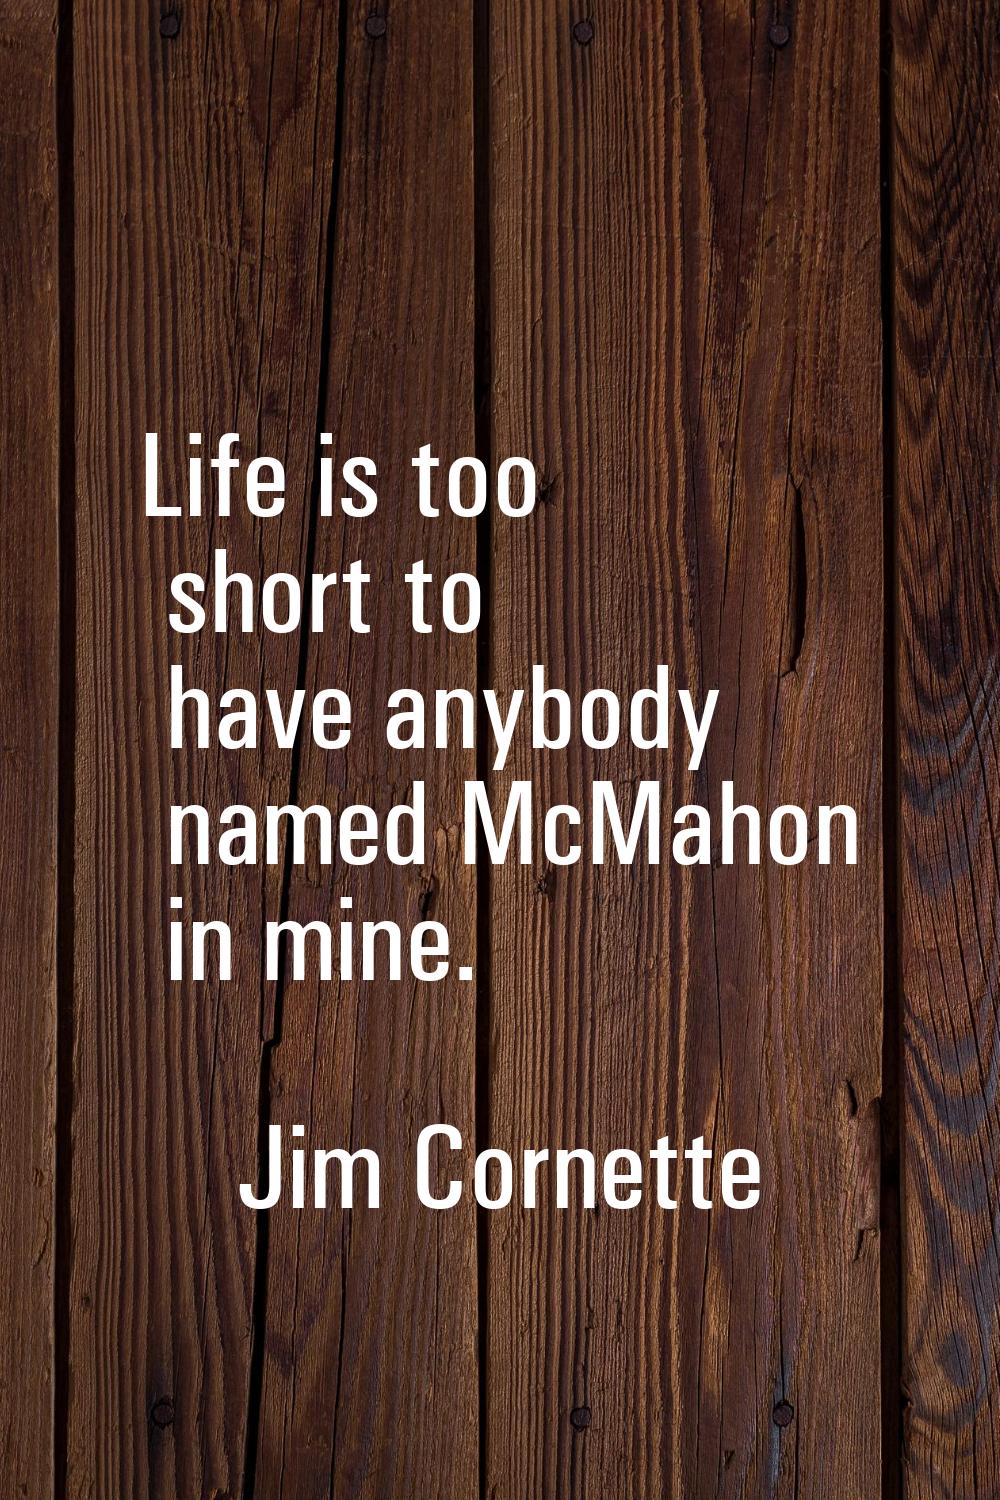 Life is too short to have anybody named McMahon in mine.